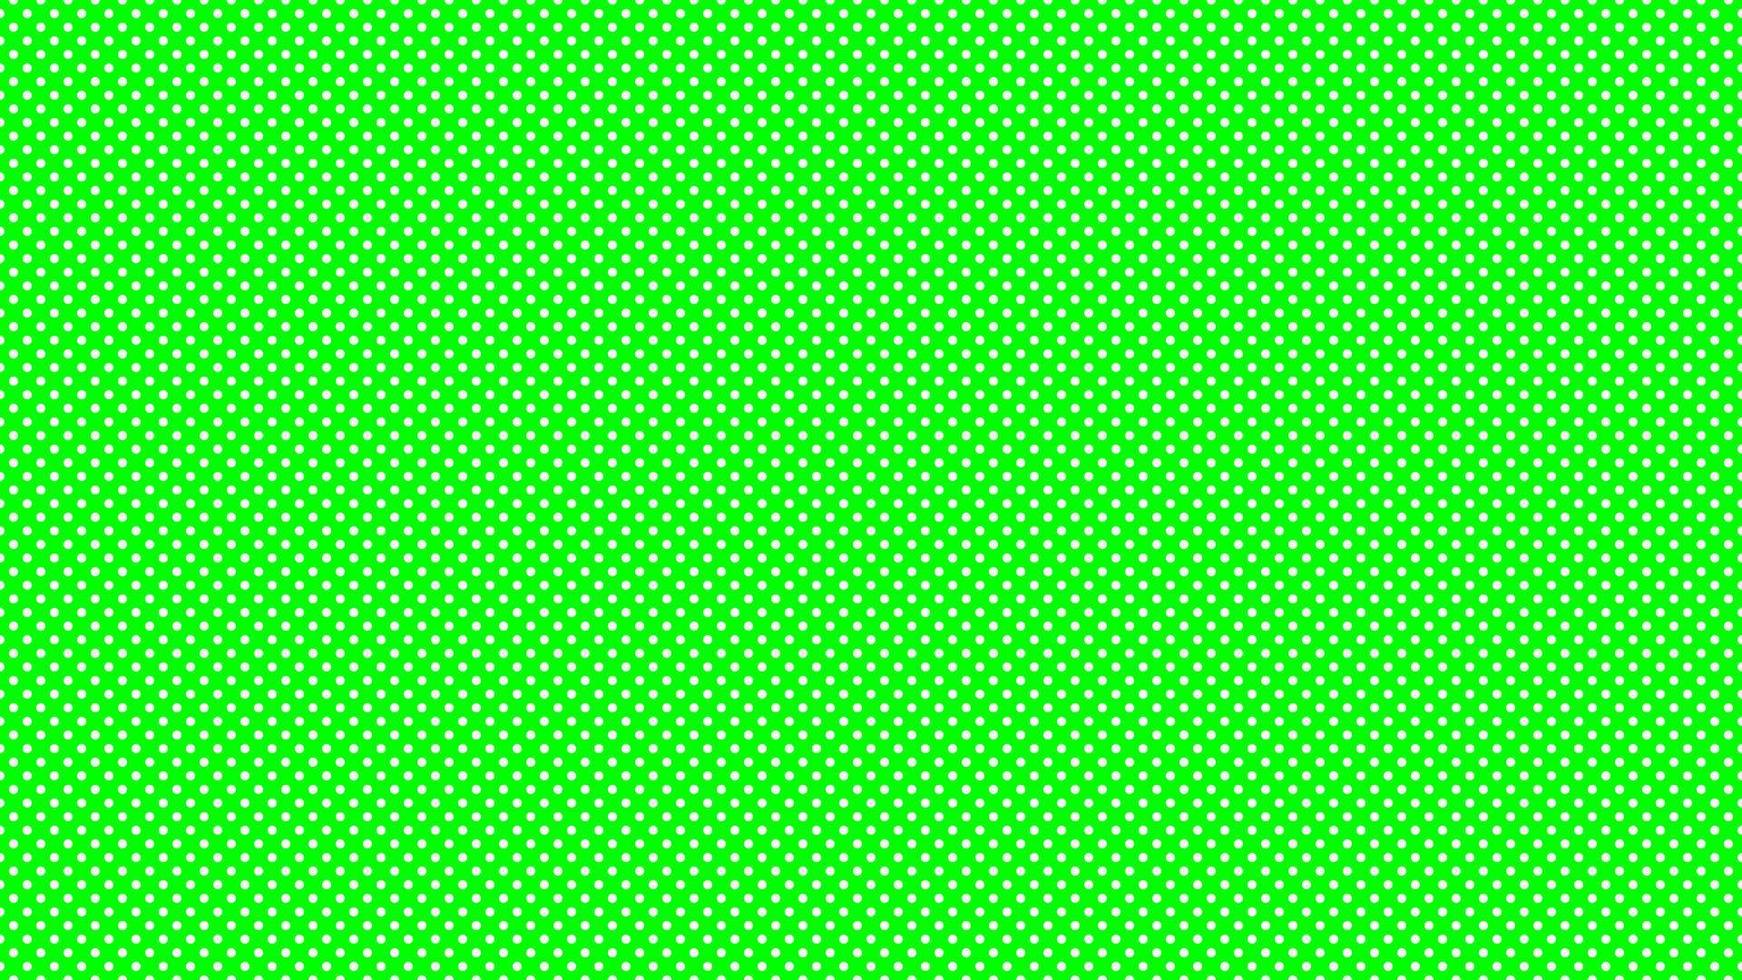 white color polka dots over lime green background vector